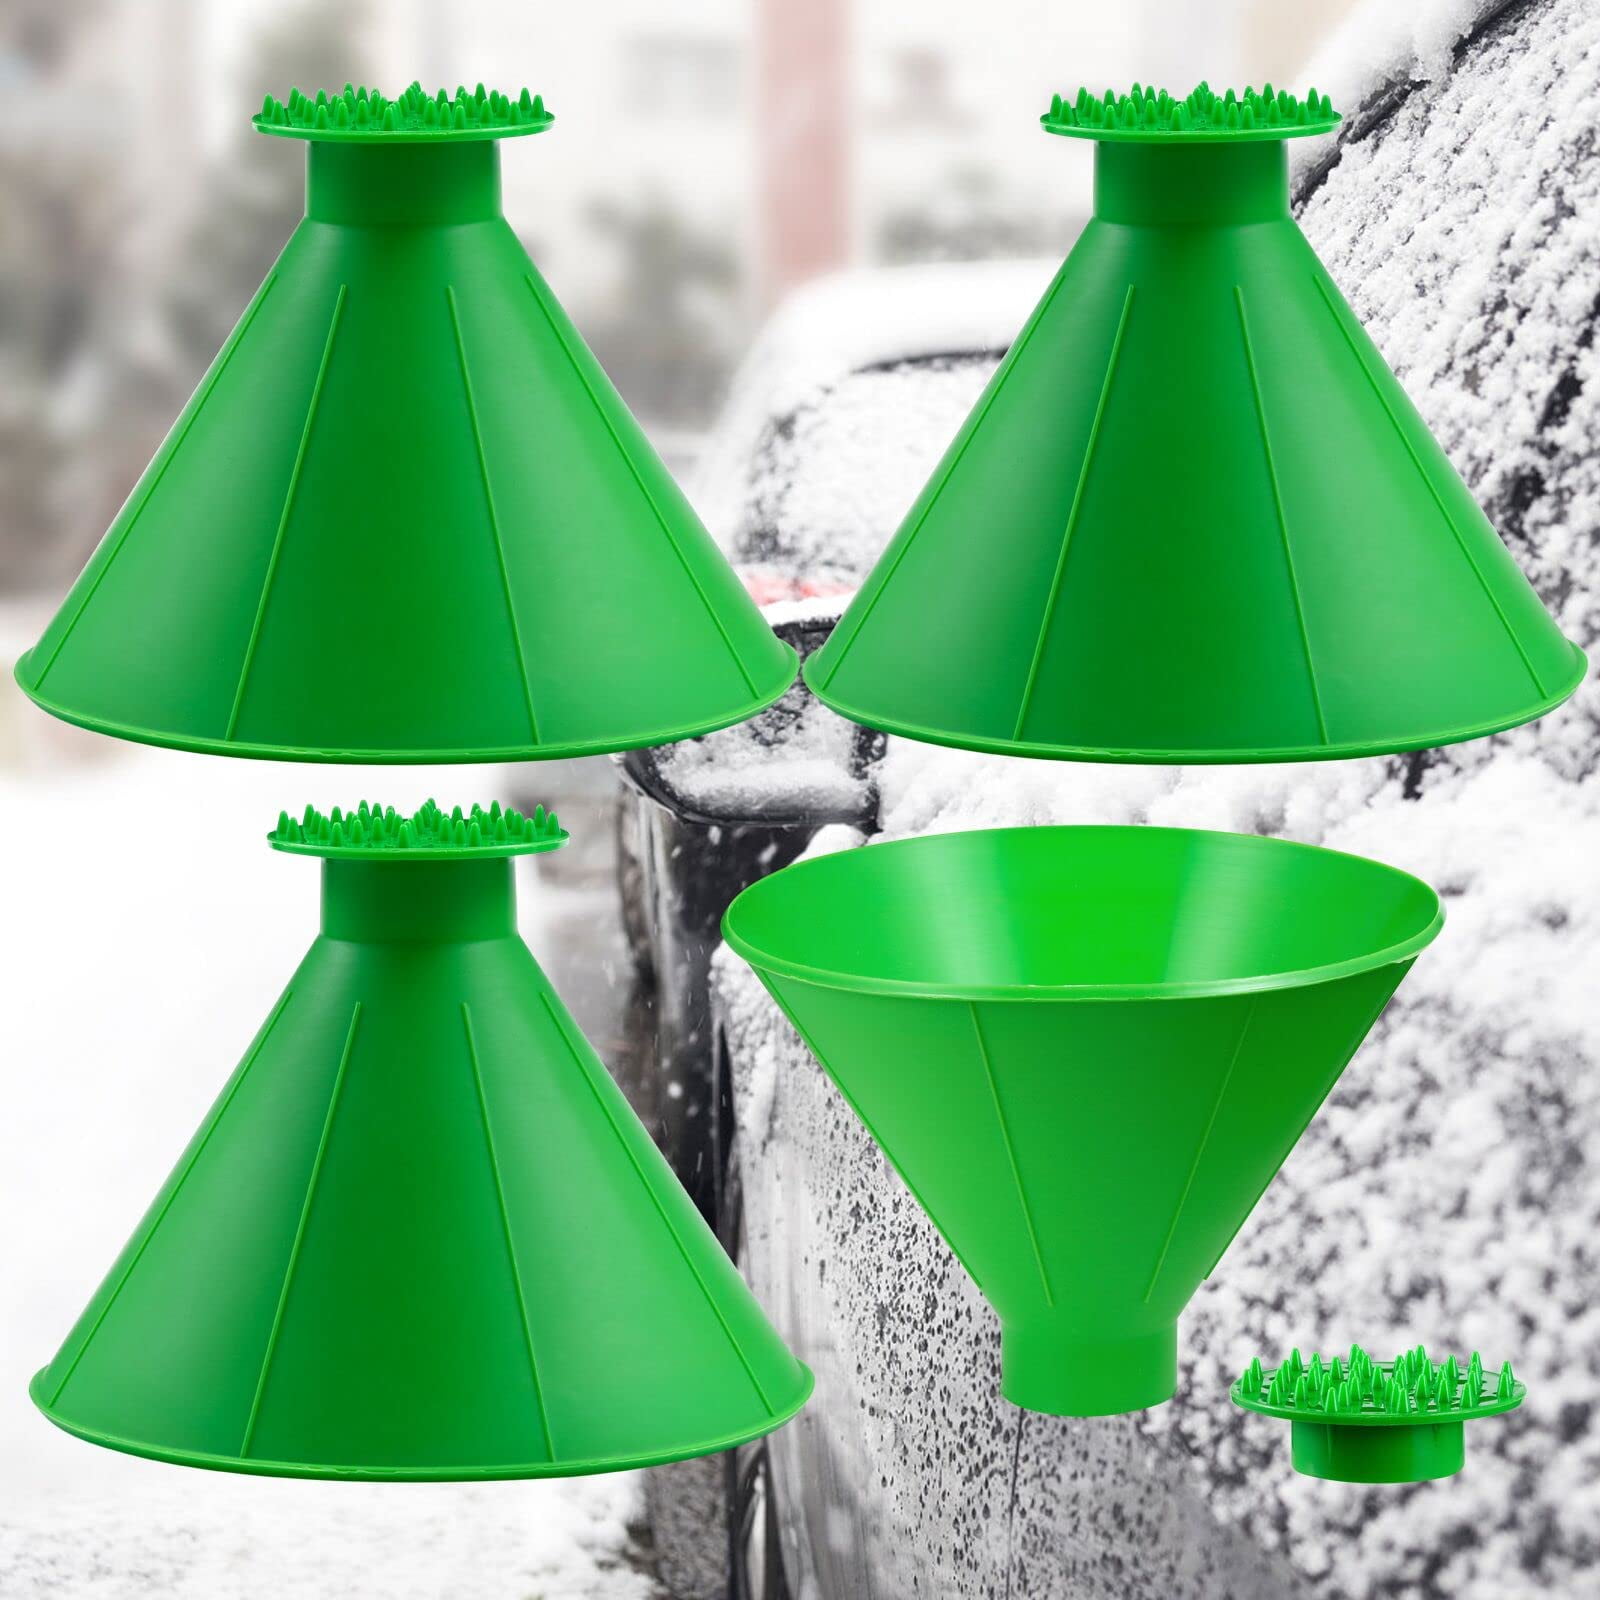 3 Pcs Magical Ice Scrapers for Car Windshield, Round Snow Scraper with  Funnel, Cone-Shaped Car Snow Remover, Car Window Scraper for Ice & Snow,  Car Winter Accessories, Gift for Chrismas (Green) 